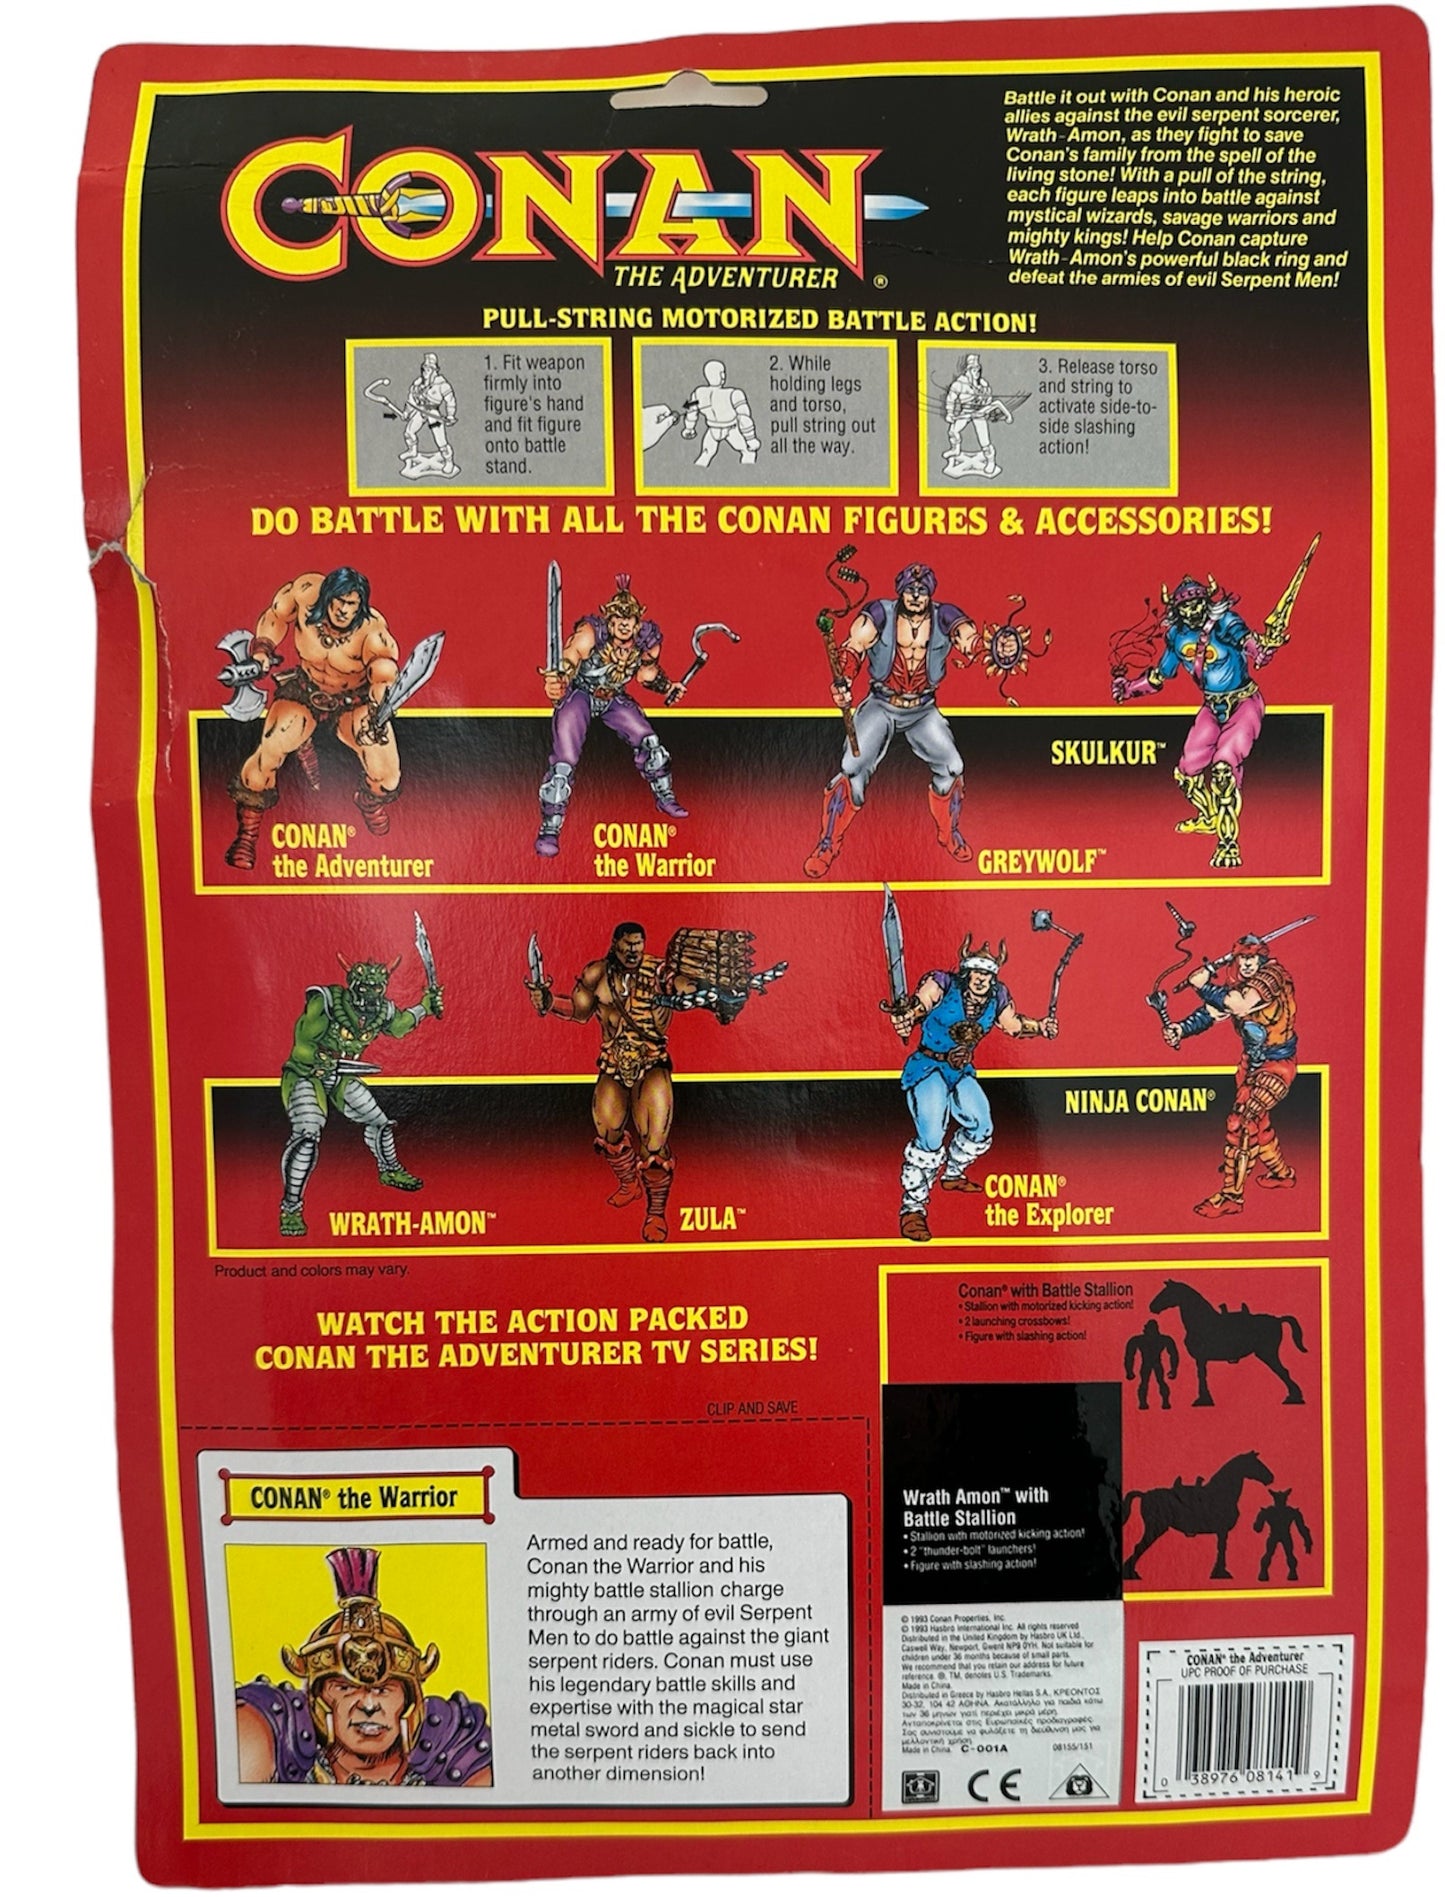 Vintage 1993 Conan The Adventurer - Conan The Warrior 8 Inch Action Figure With Motorized Battle Action - Brand New Factory Sealed Shop Stock Room Find